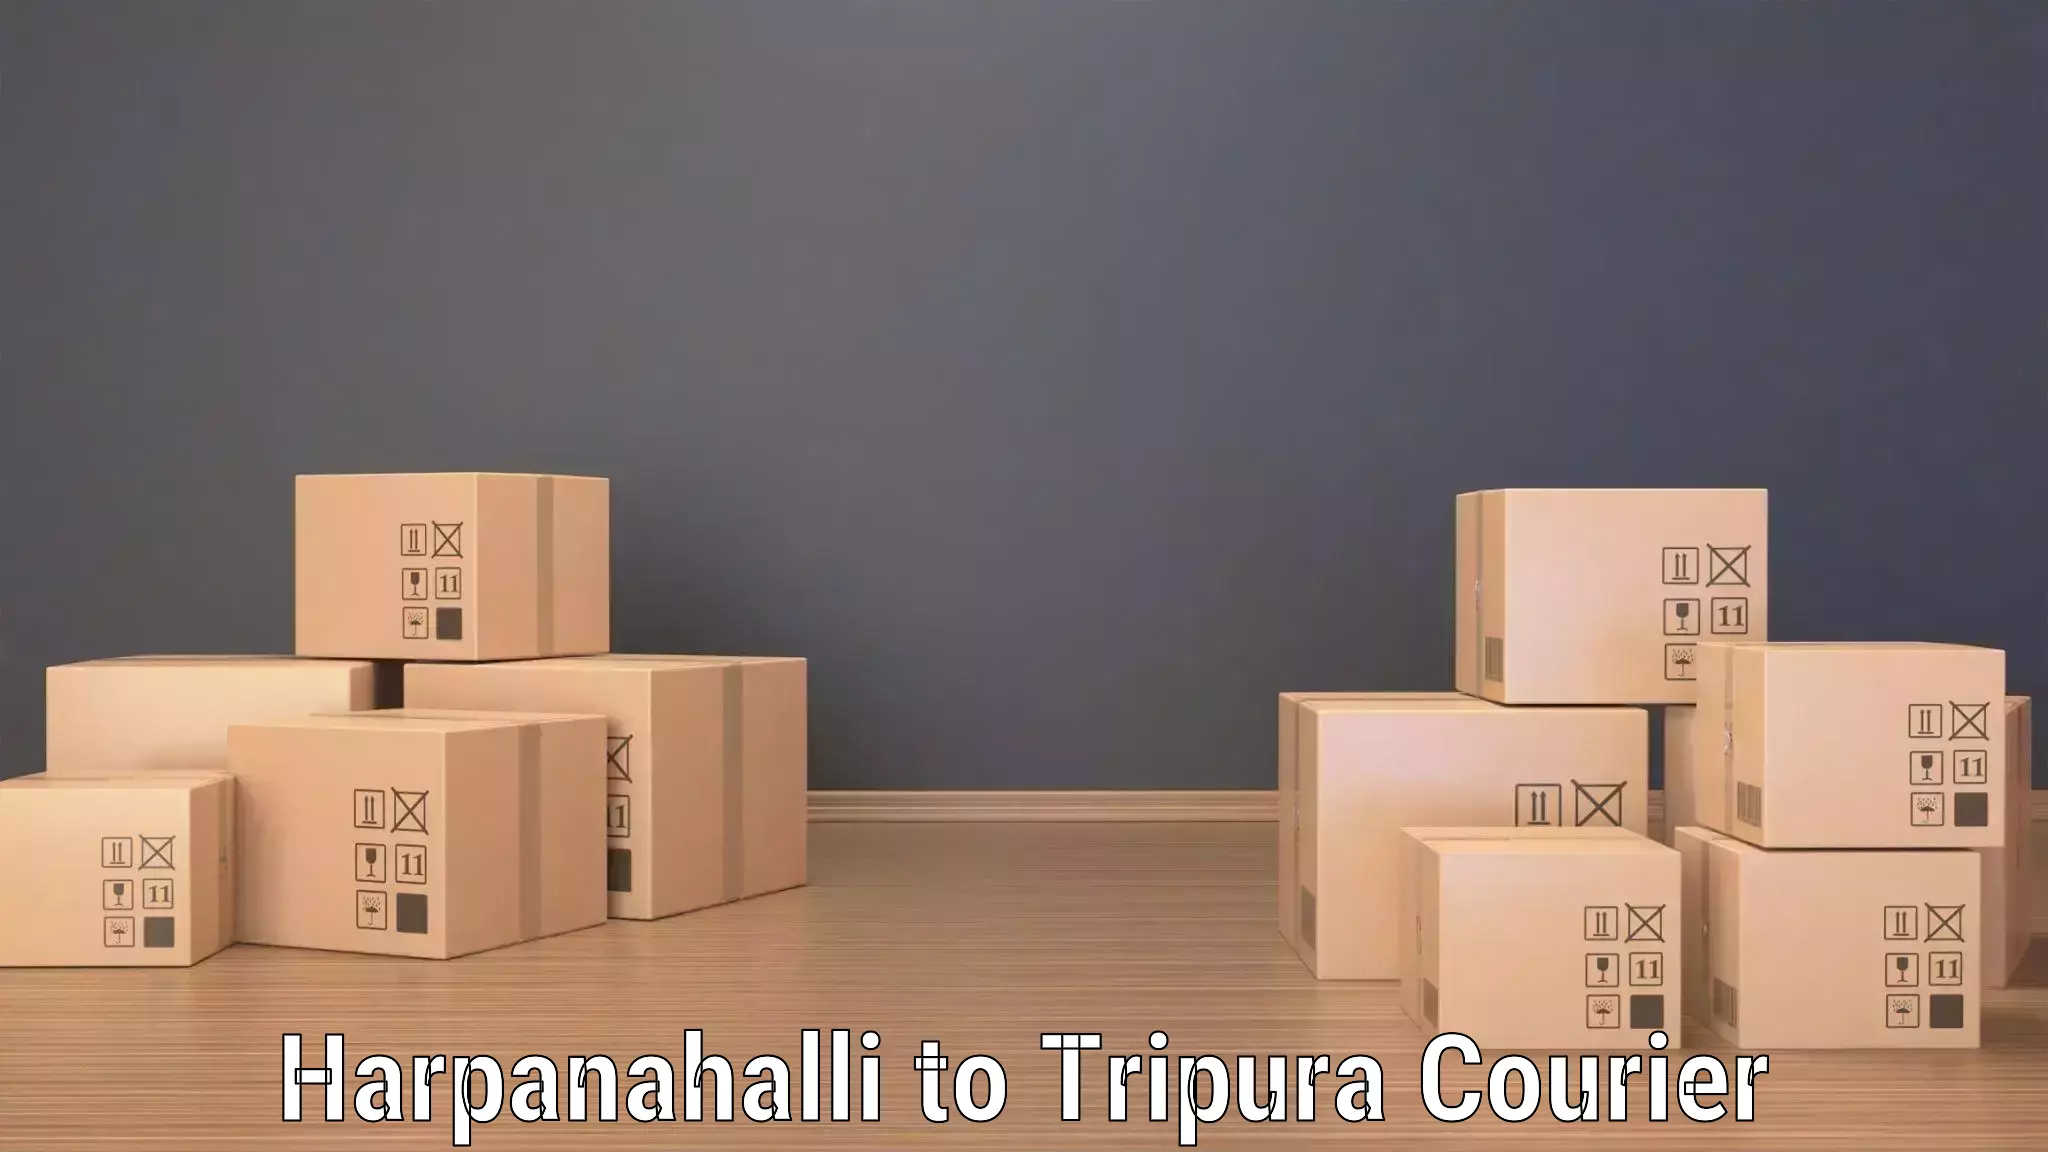 Reliable delivery network Harpanahalli to Tripura